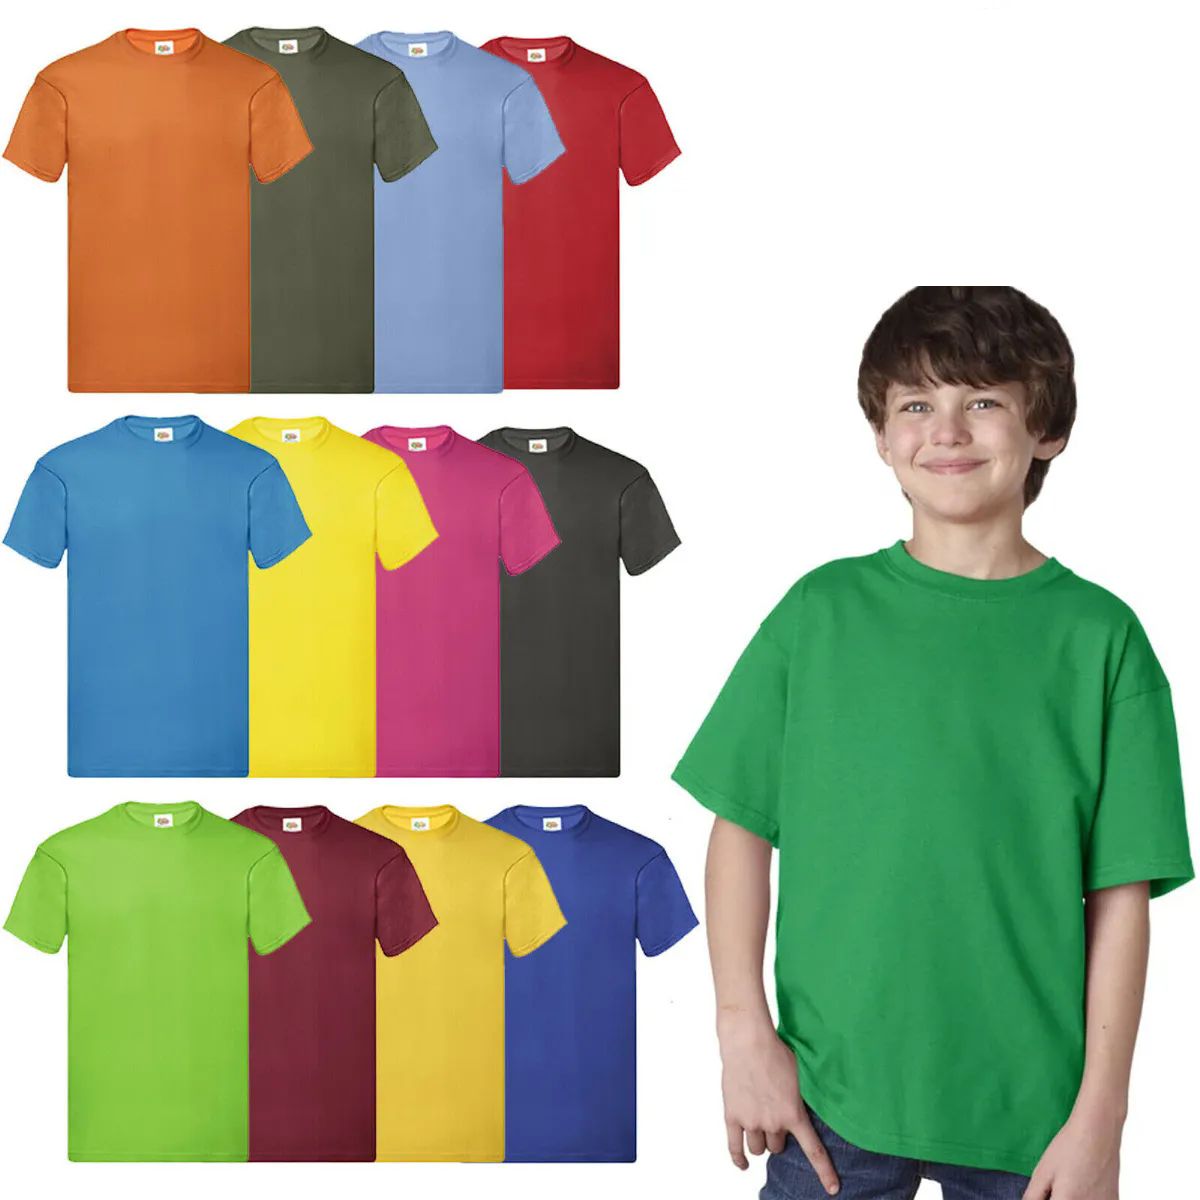 24 Pieces of Billionhats Kids Youth Cotton Assorted Colors T-Shirts Size Xlarge